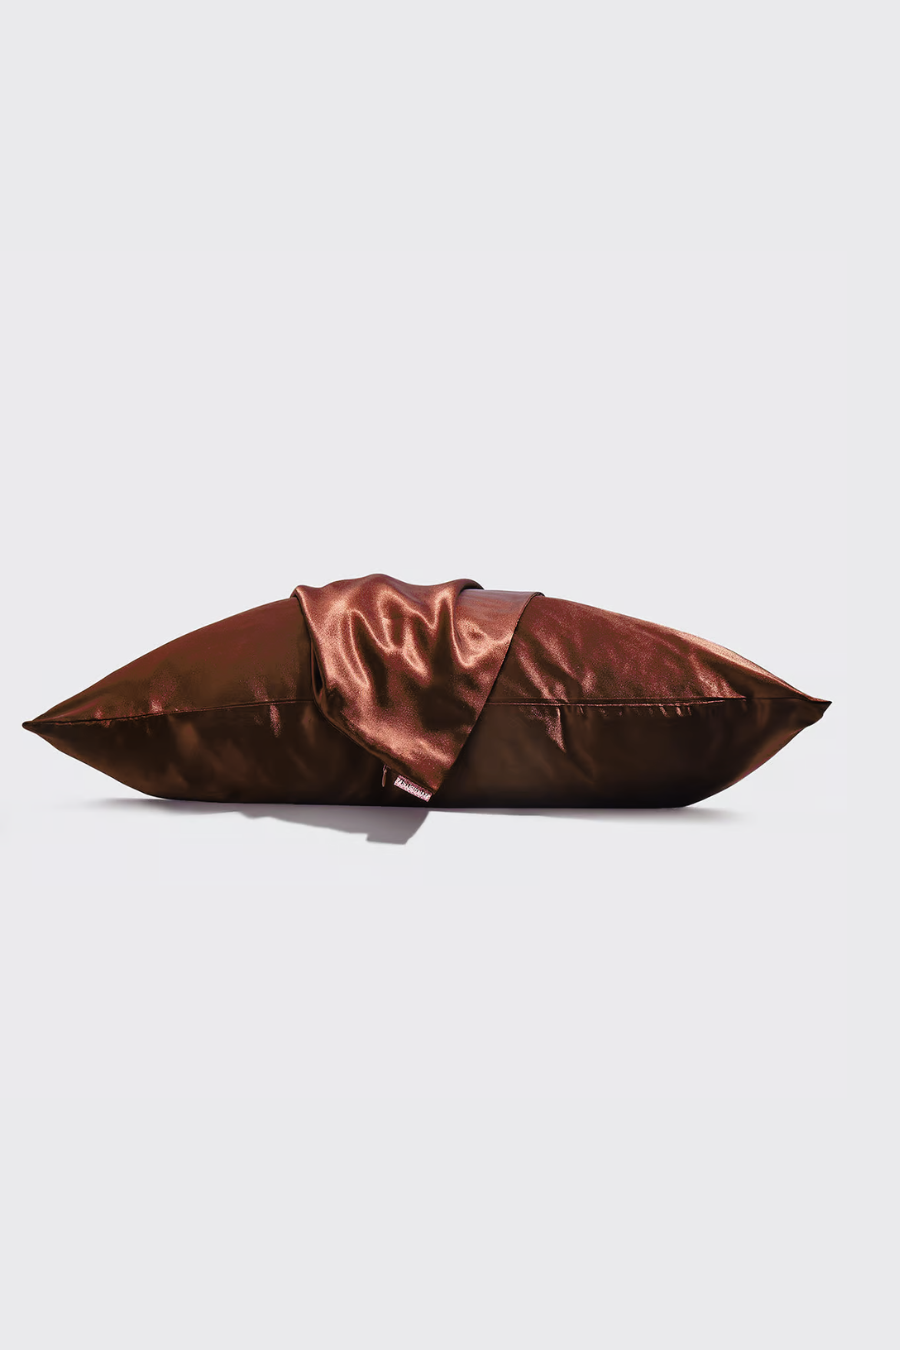 cocoa satin pillow case laying flat with a 2nd satin pillow case wrapped over it